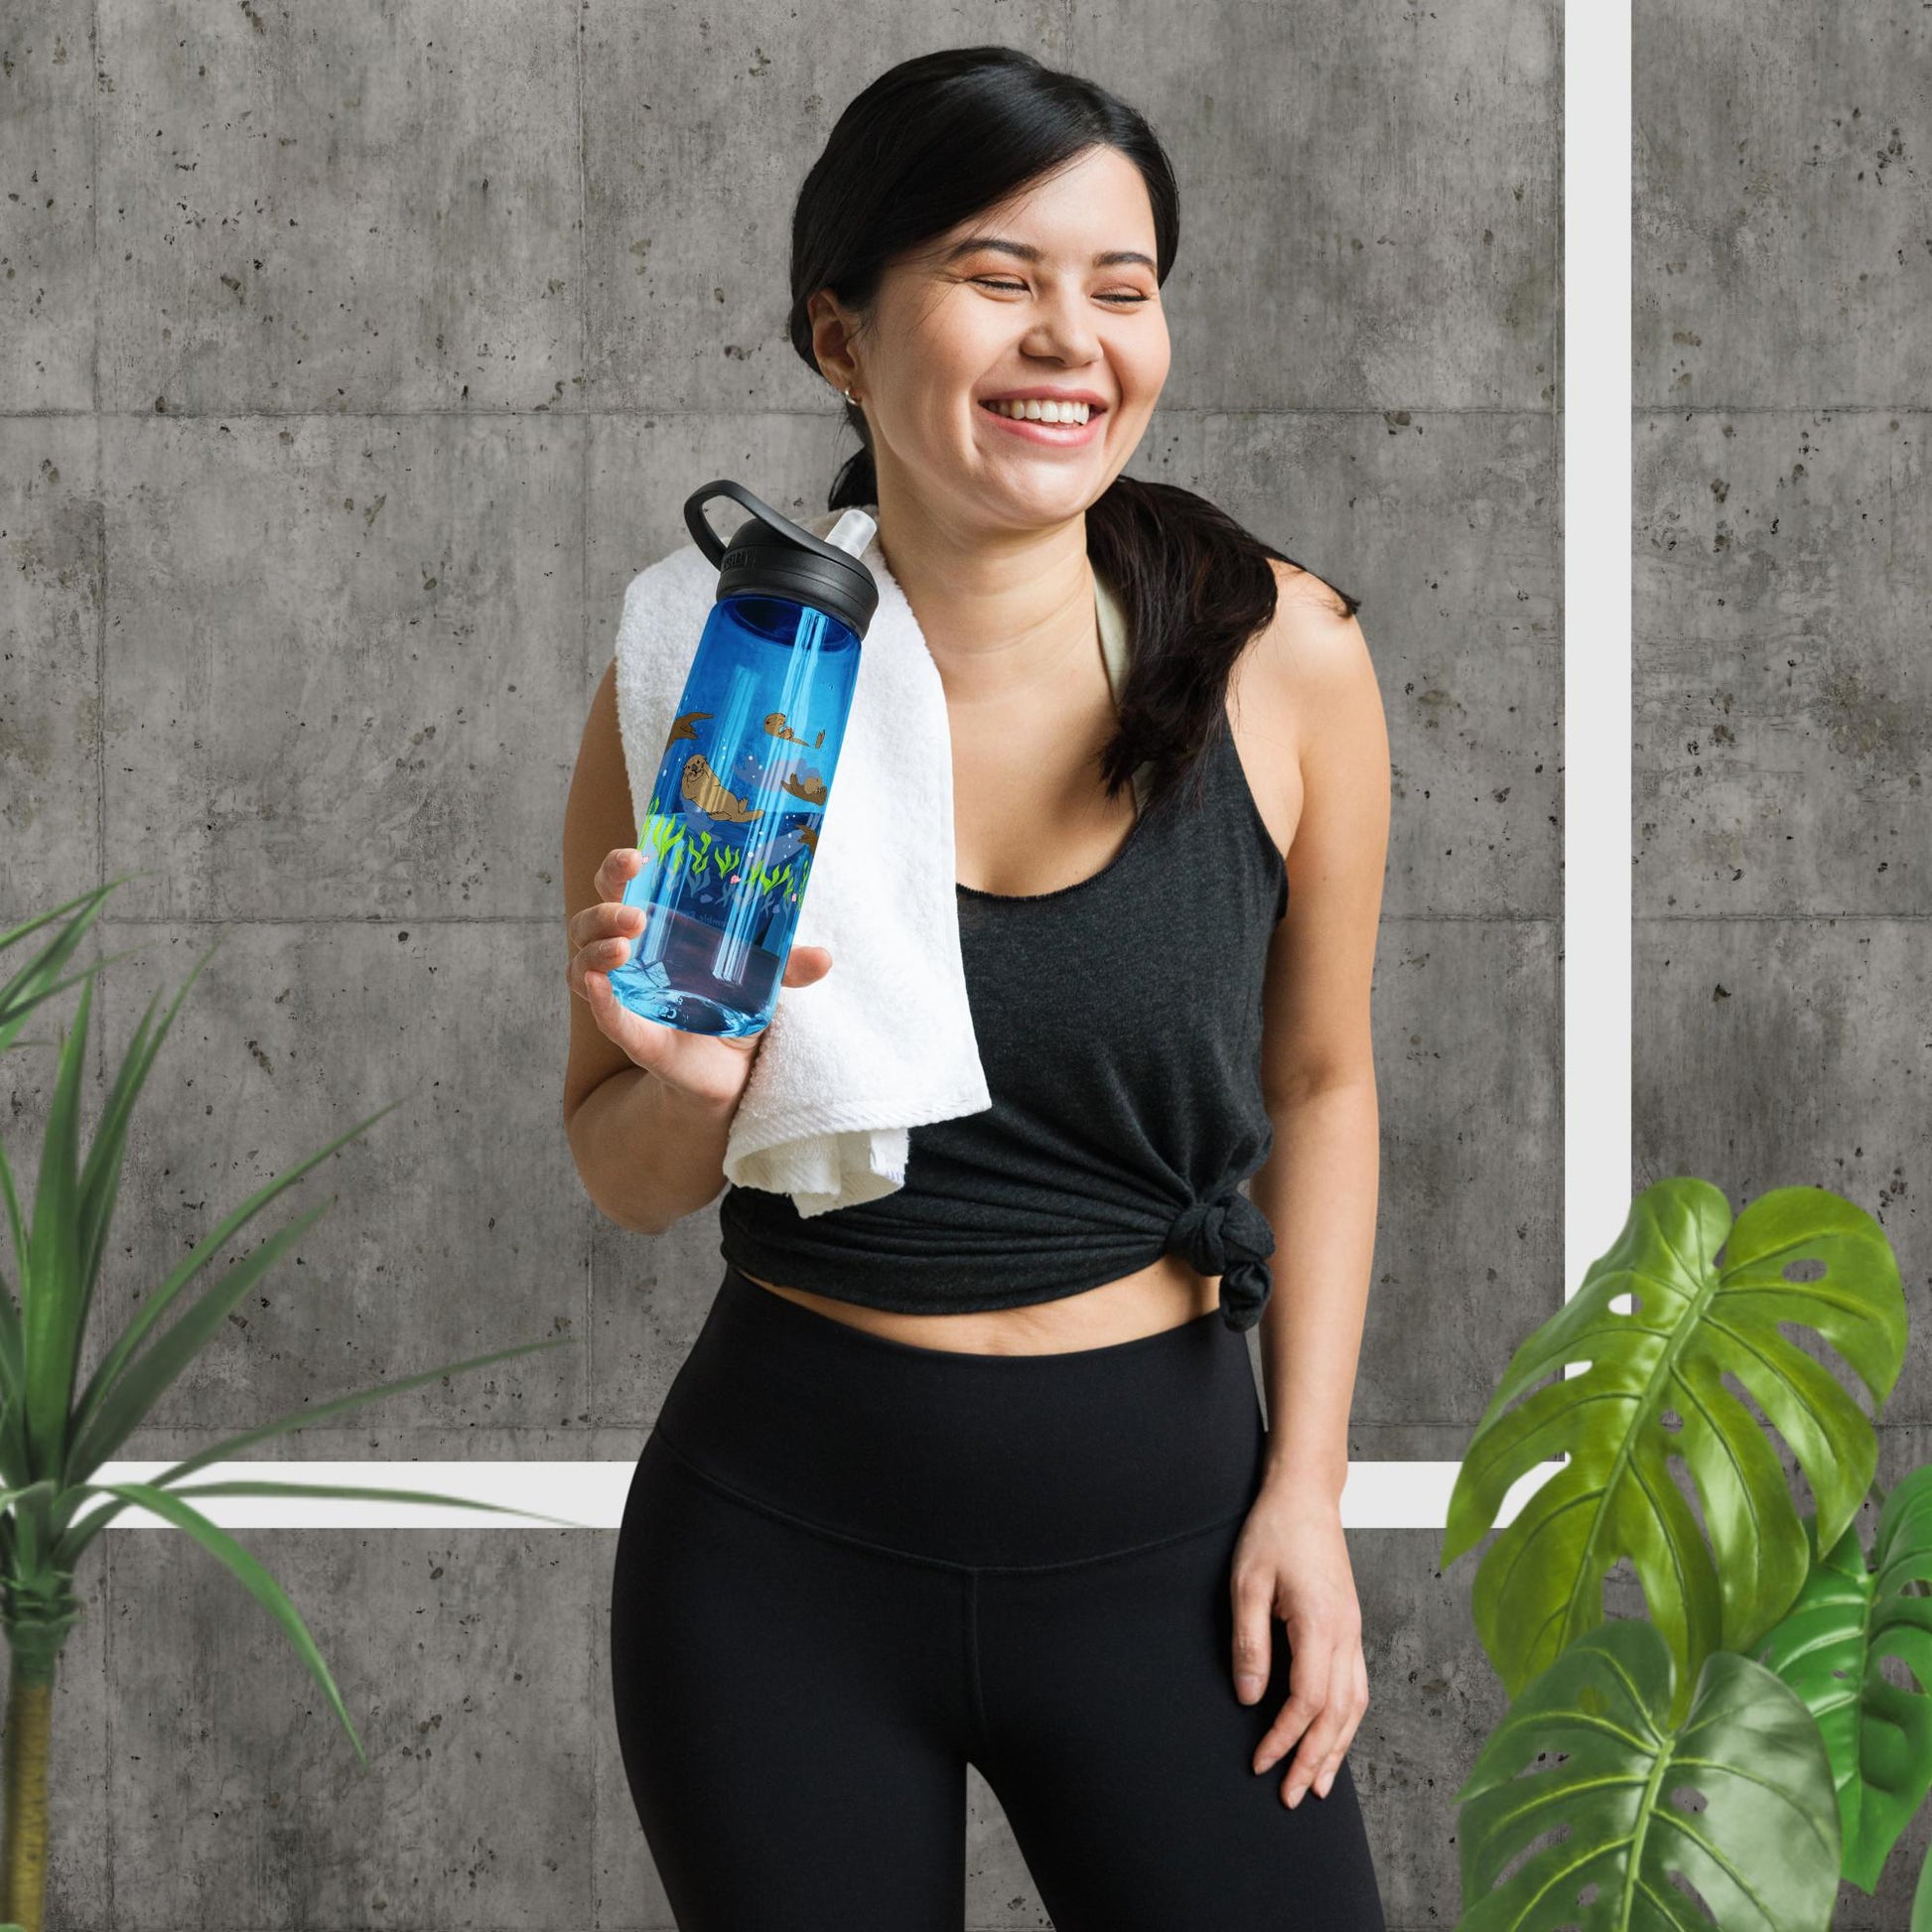 25 ounce sports water bottle with spill proof lid and bite valve. Dark blue stain and odor-resistant BPA-free plastic with sea otter designs around the bottle, swimming above the seaweed and shells. Shown in smiling gym model's hands next to house plants.